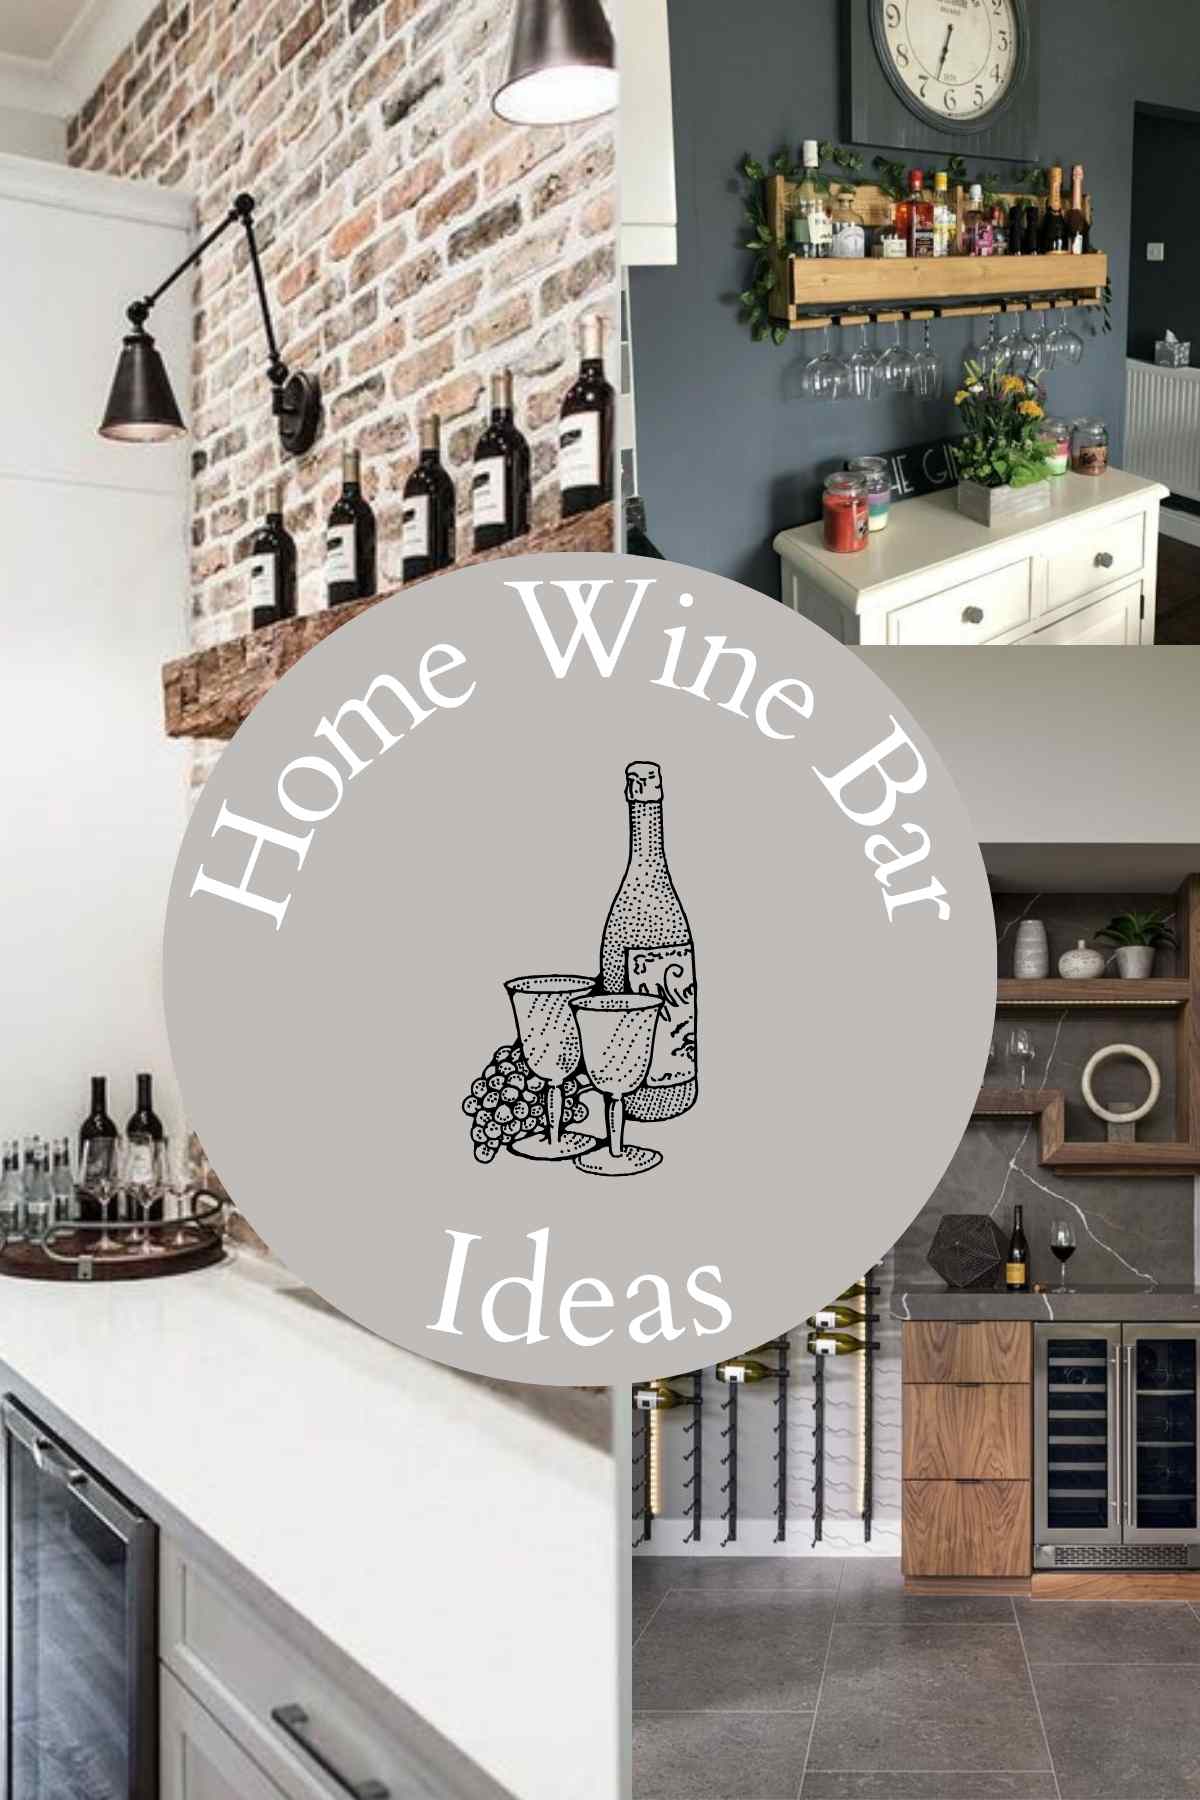 37+ Coffee And Wine Bar Ideas For Home - Pinkpopdesign